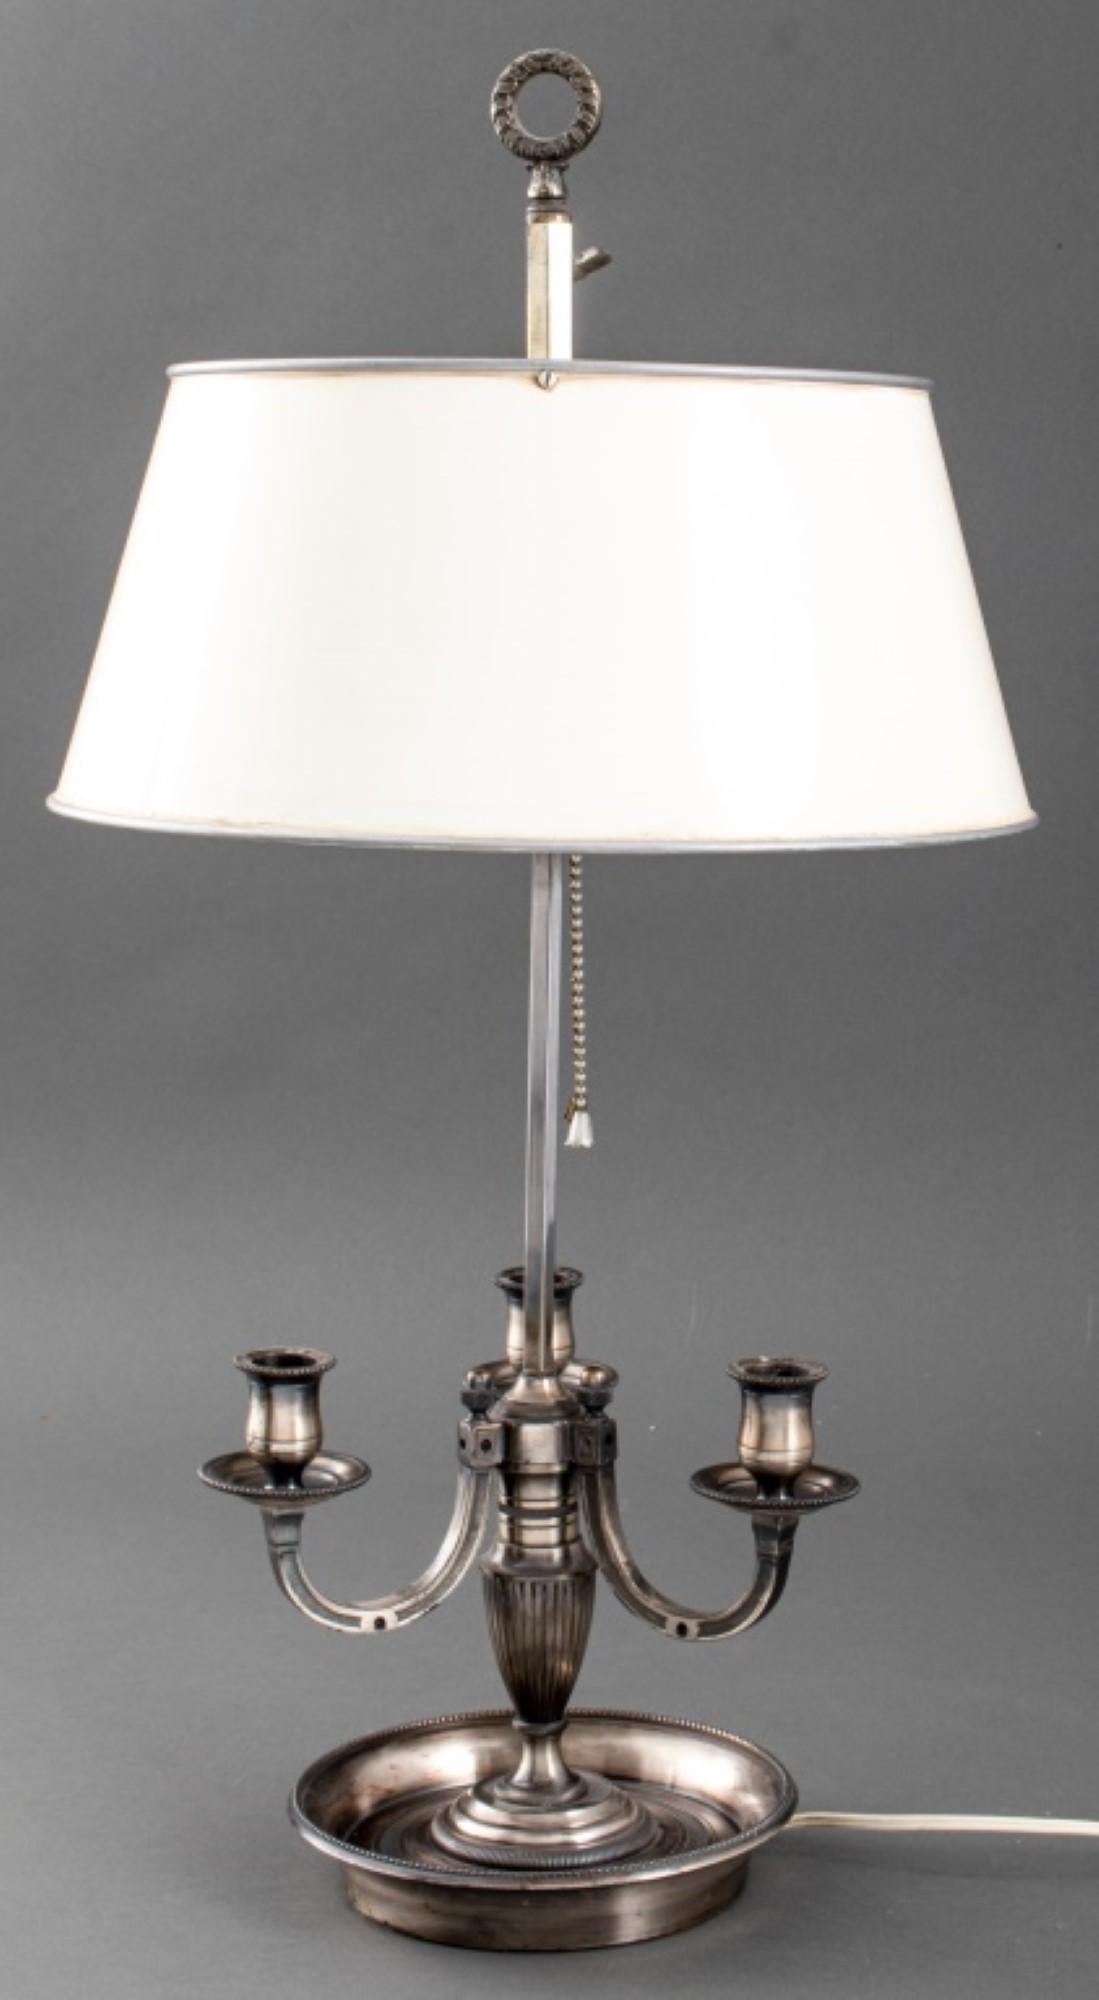 A Timeless Illumination: Silvered Bronze Three-Light Bouillotte Lamp
This exquisite 20th-century lamp embodies sophisticated elegance. Crafted from gleaming silvered bronze, it features three graceful arms that arch upwards, reminiscent of delicate